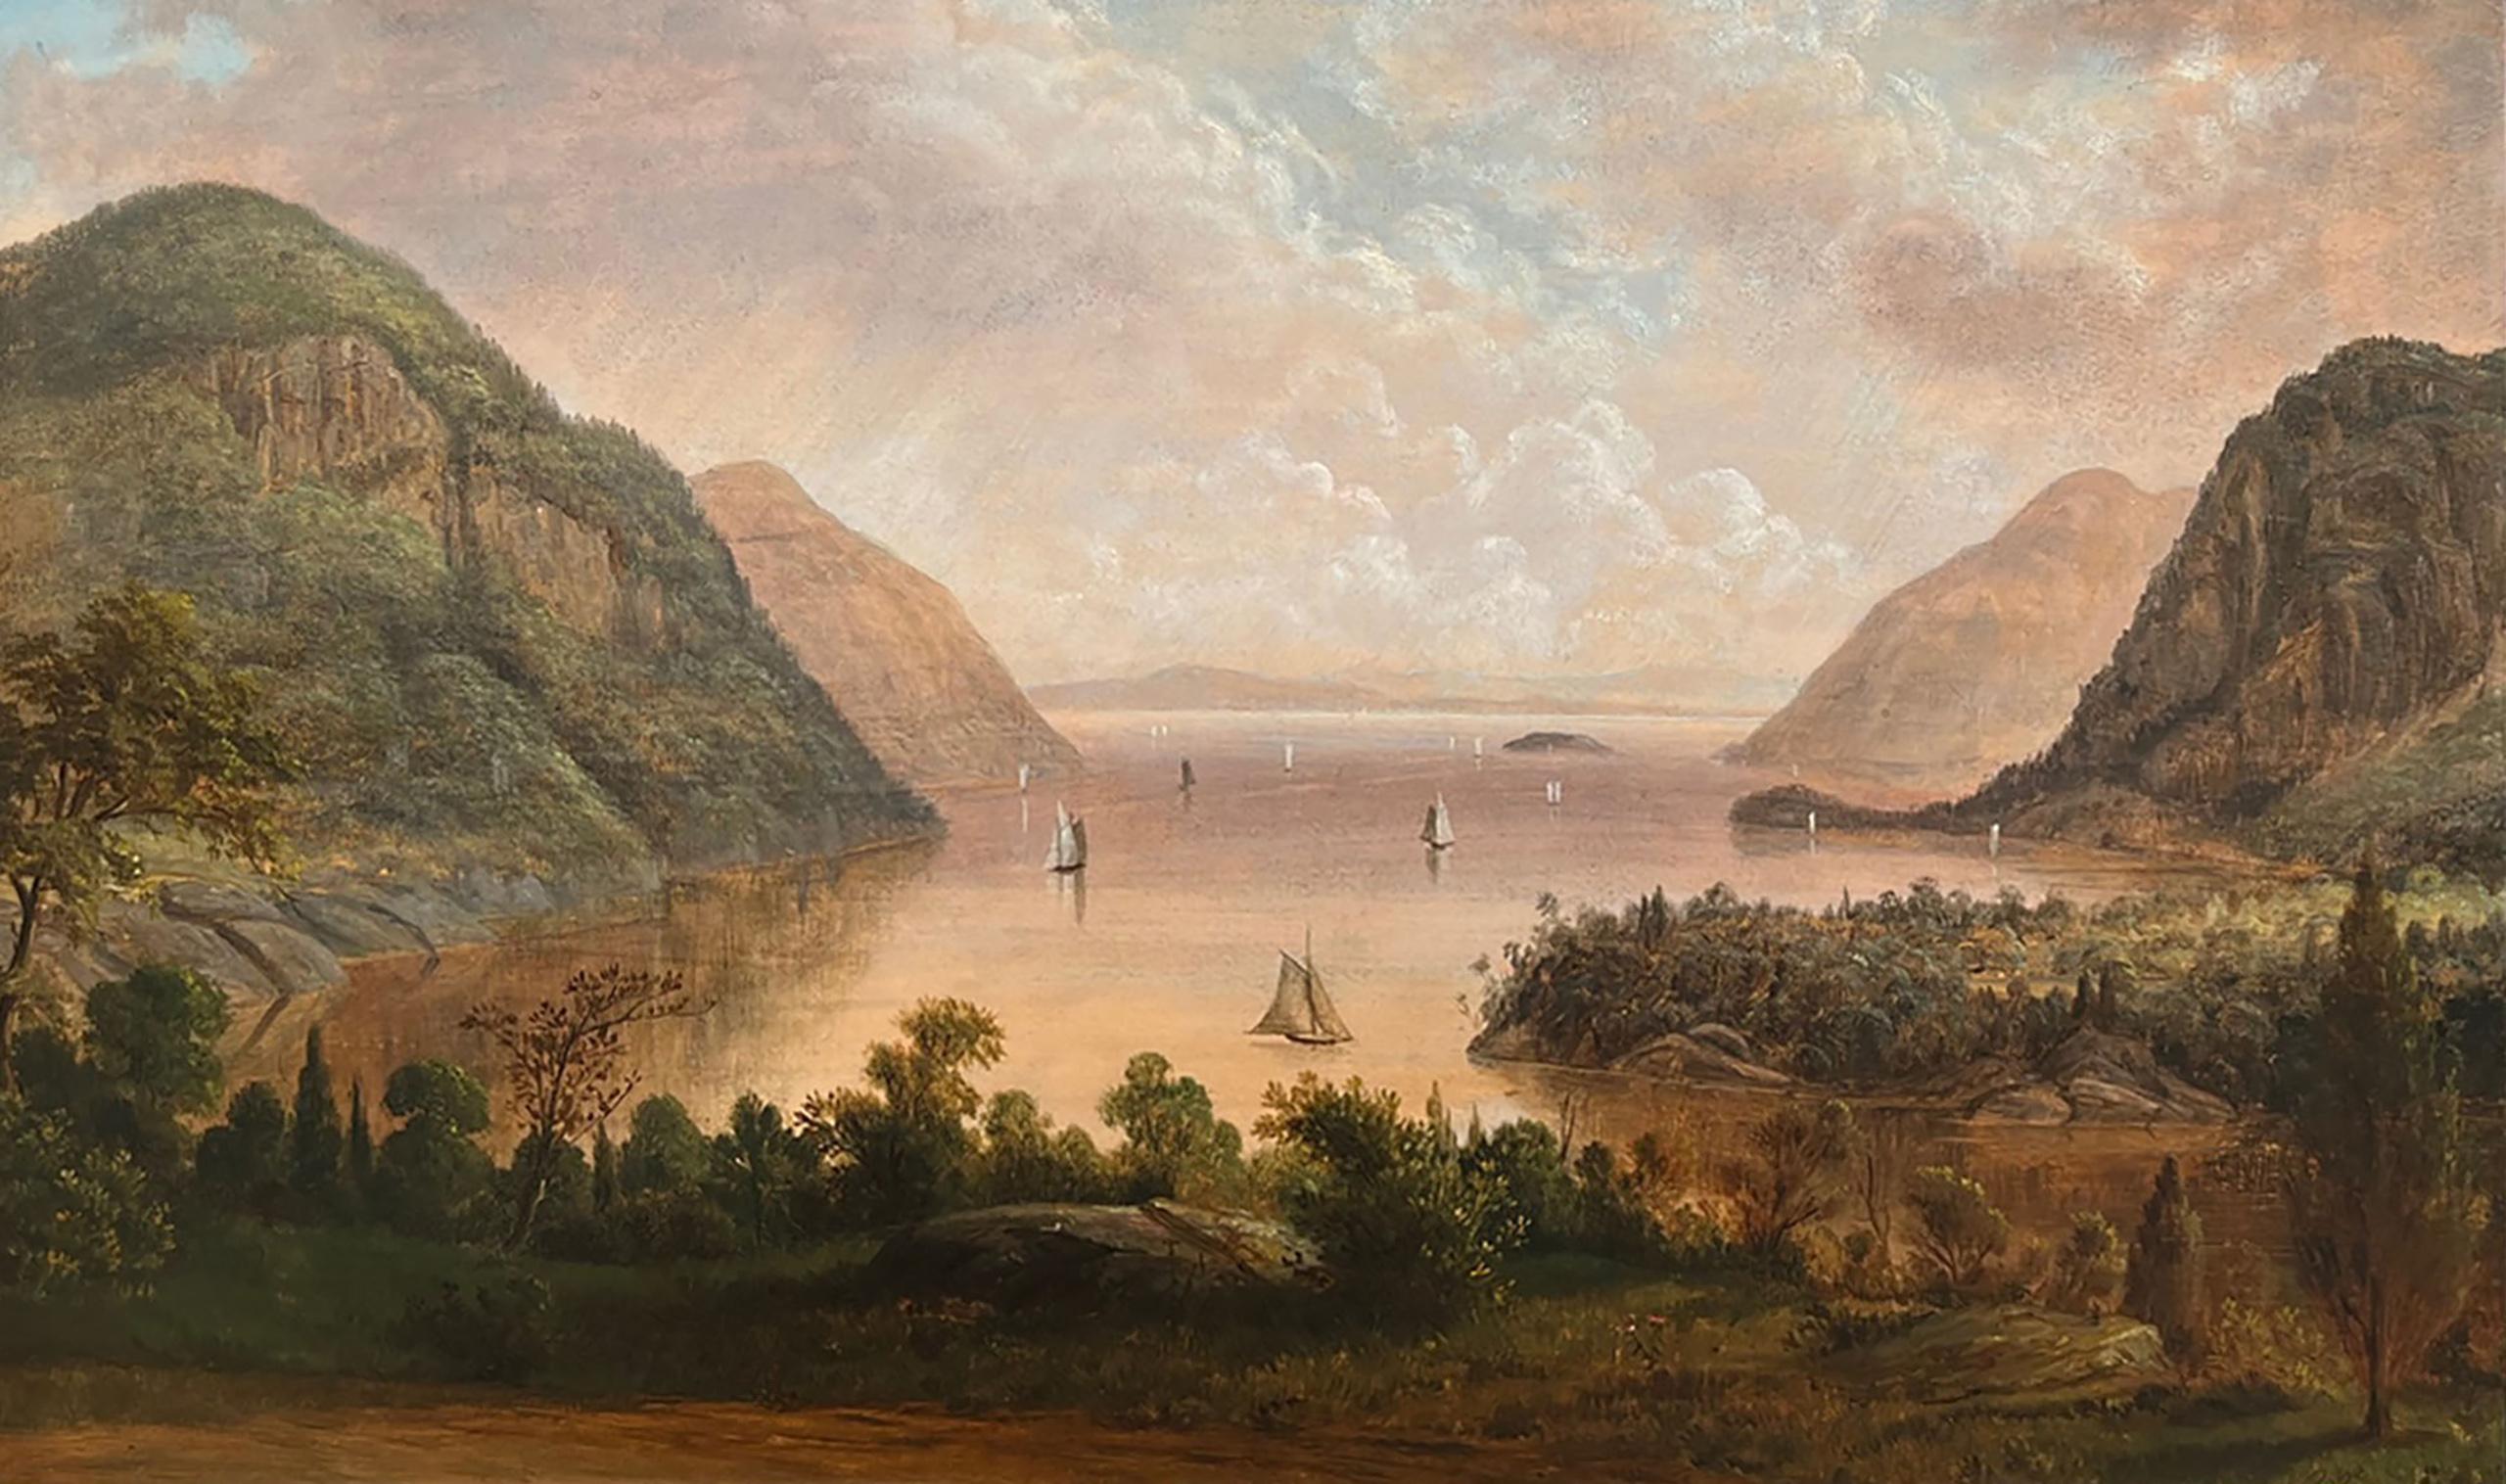 Highlands - Hudson River from West Point by Thomas B. Pope (American, 1834-1891) - Painting by Thomas Benjamin Pope